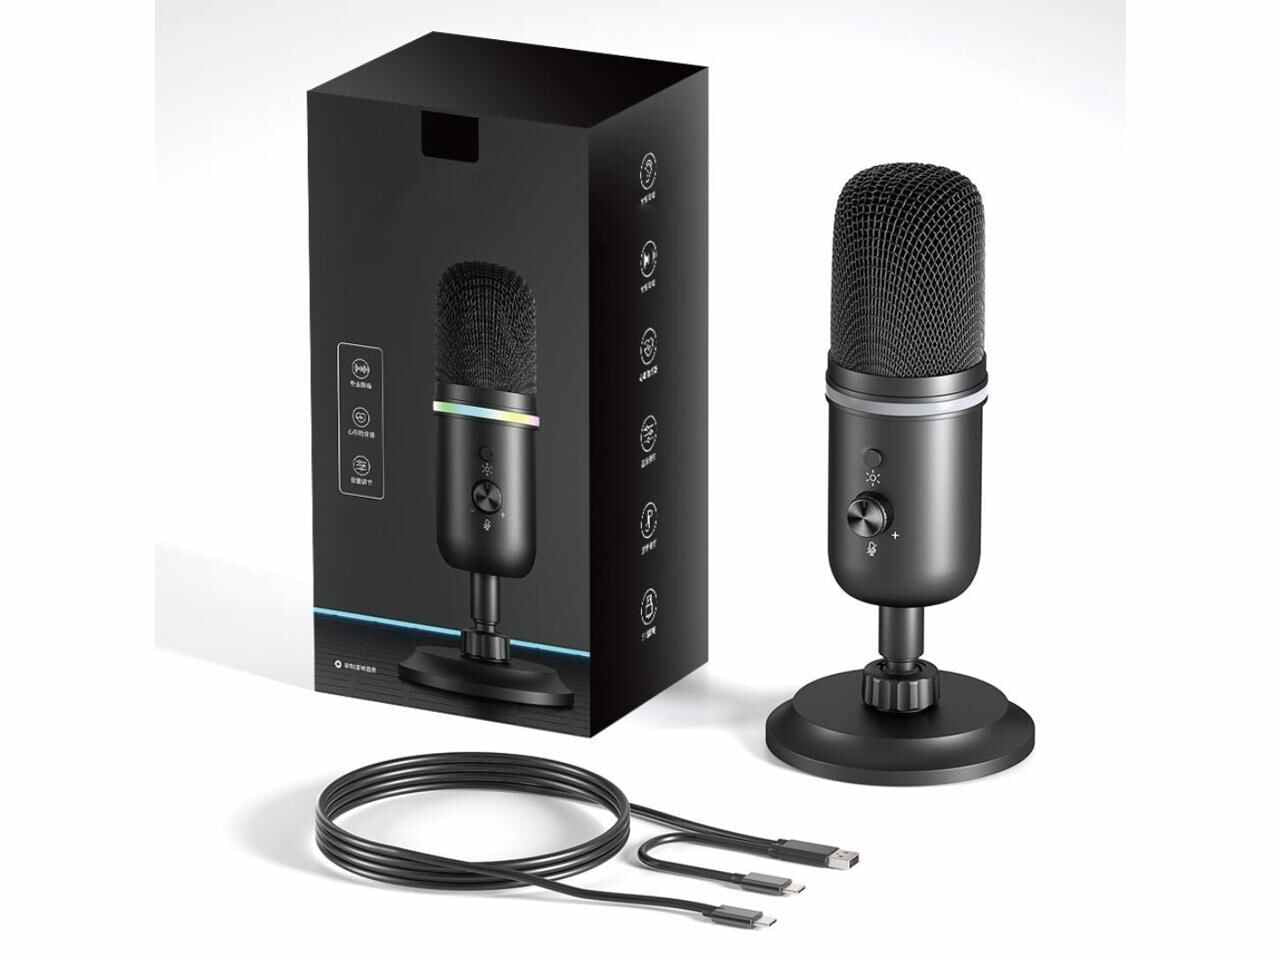 USB Microphone, Condenser Gaming Microphone for PC/MAC/PS4/PS5/Phone-  Cardioid Mic with Brilliant RGB Lighting Headphone Output Volume Control, Mute  Button, for Streaming Podcast  Discord 